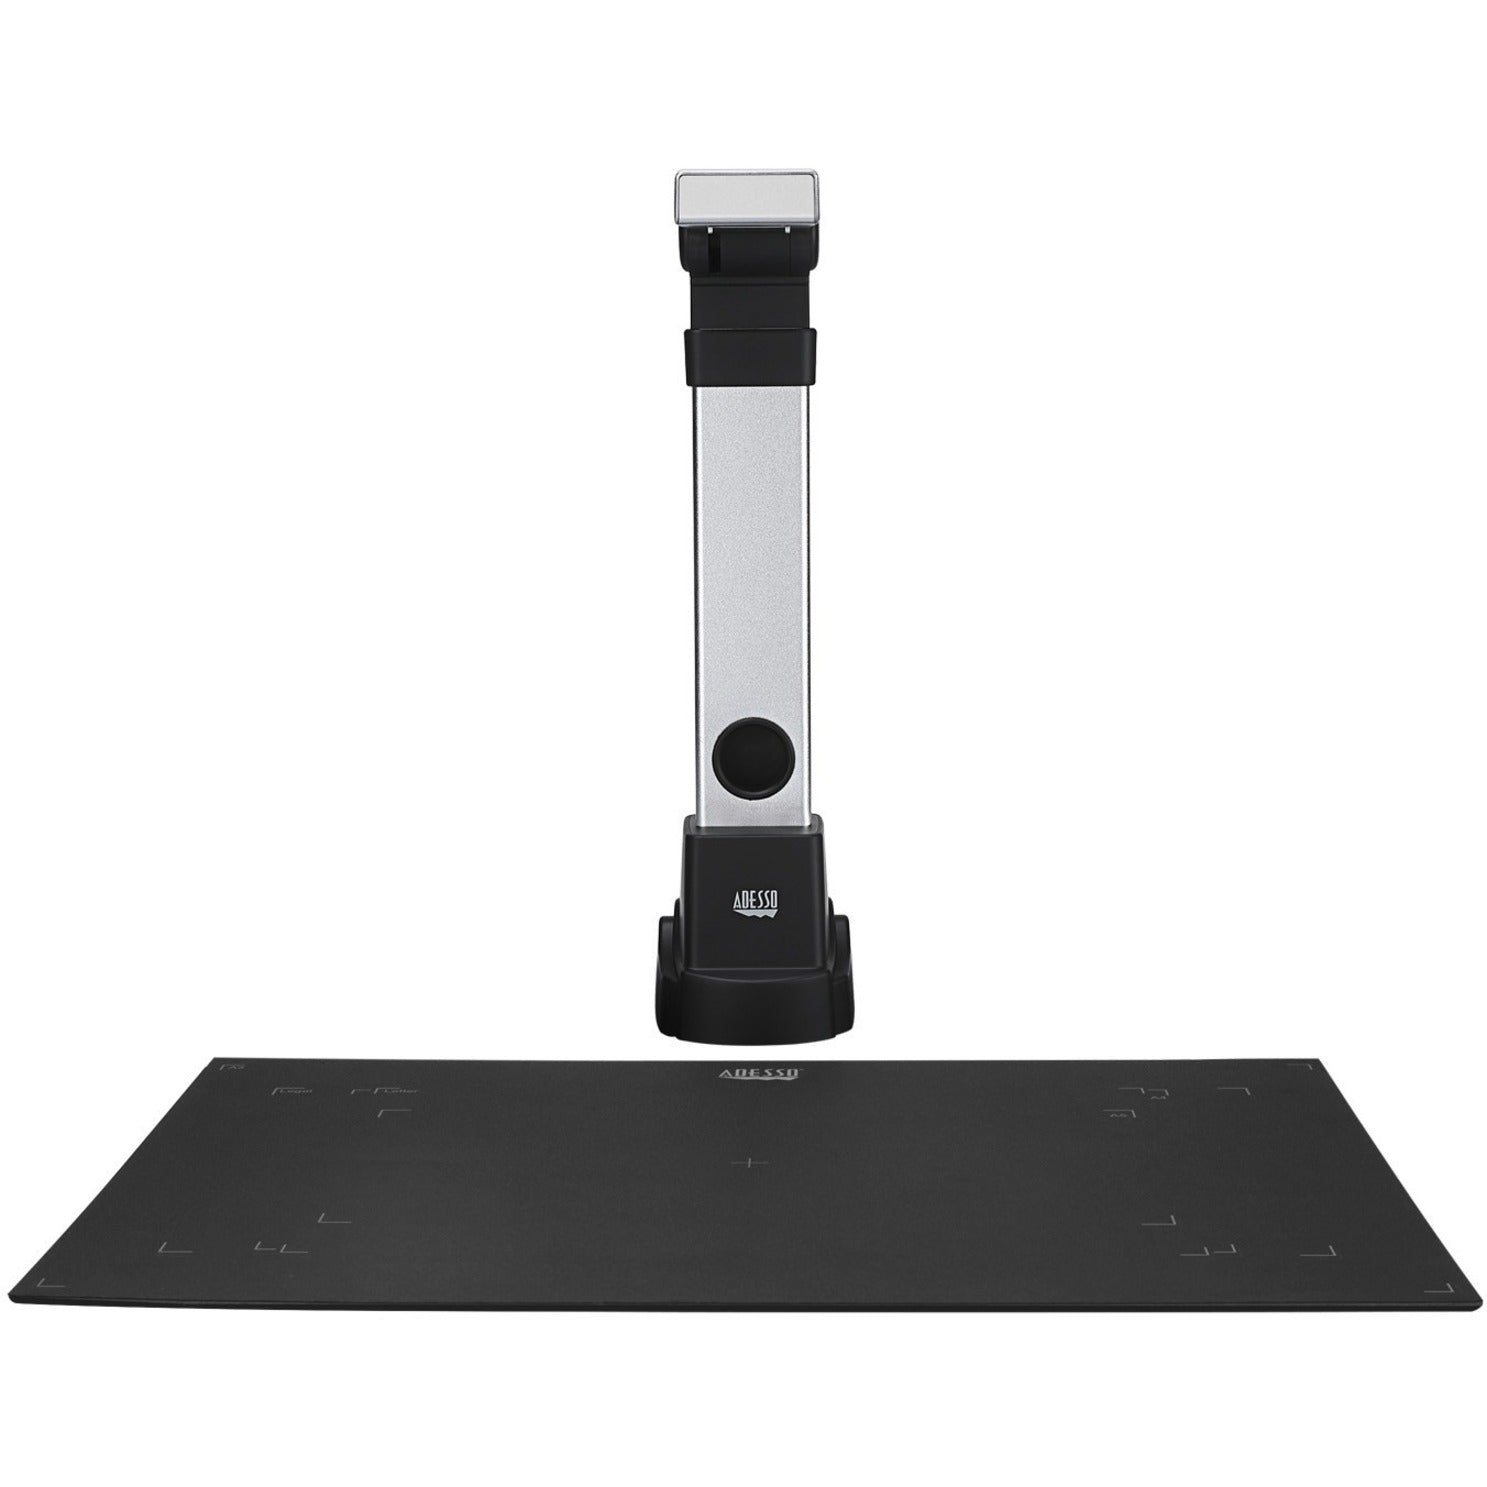 Adesso Cybertrack 820 8 Megapixel Fixed-Focus A3 Document Camera Scanner with OCR Function